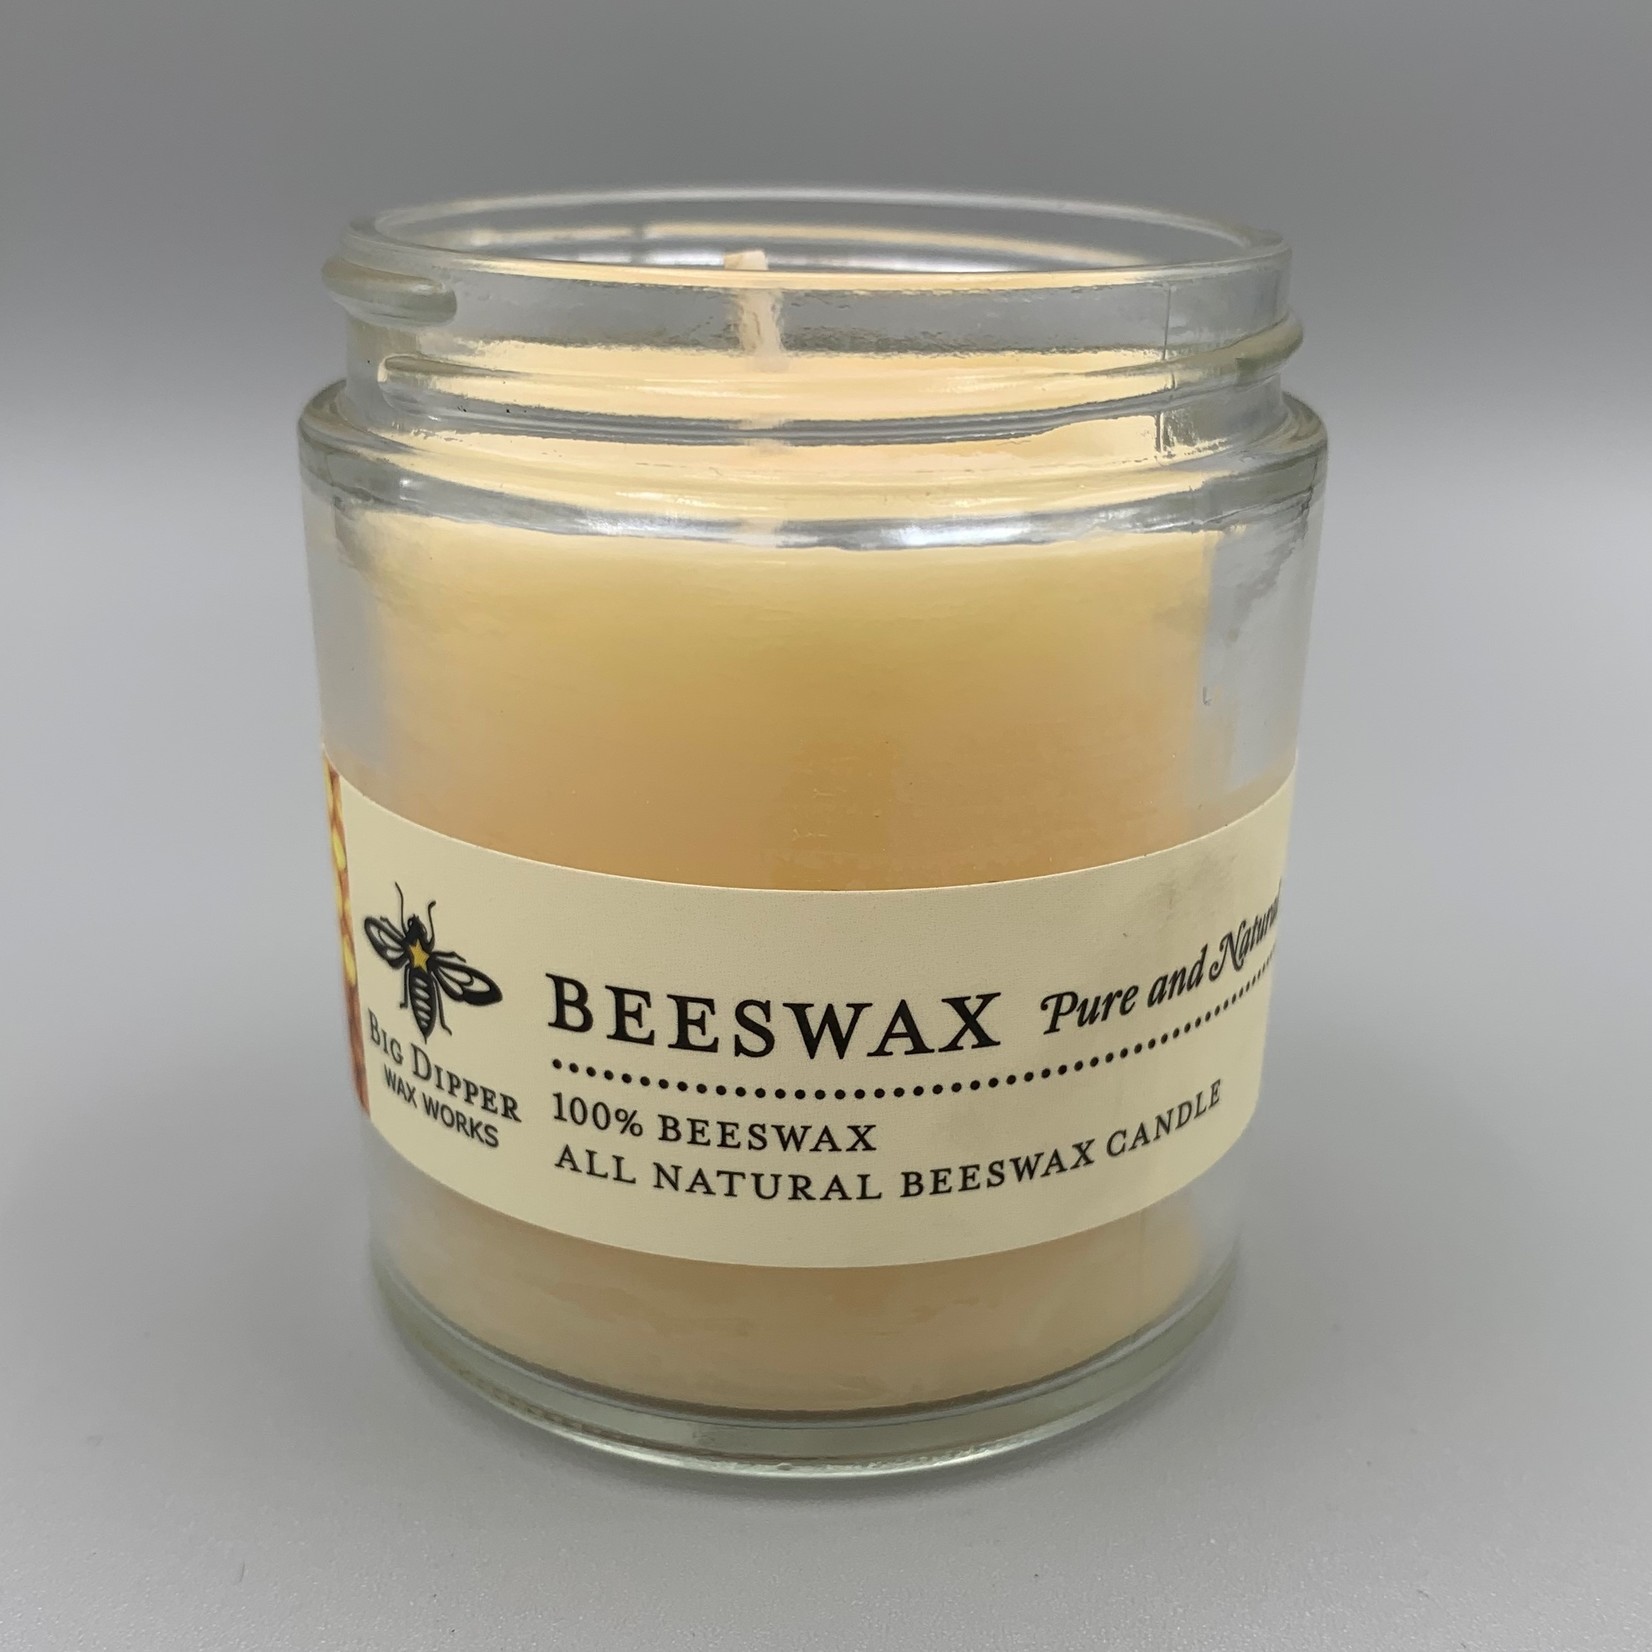 Big Dipper: Beeswax Candle in Glass Jar, 3.2 oz